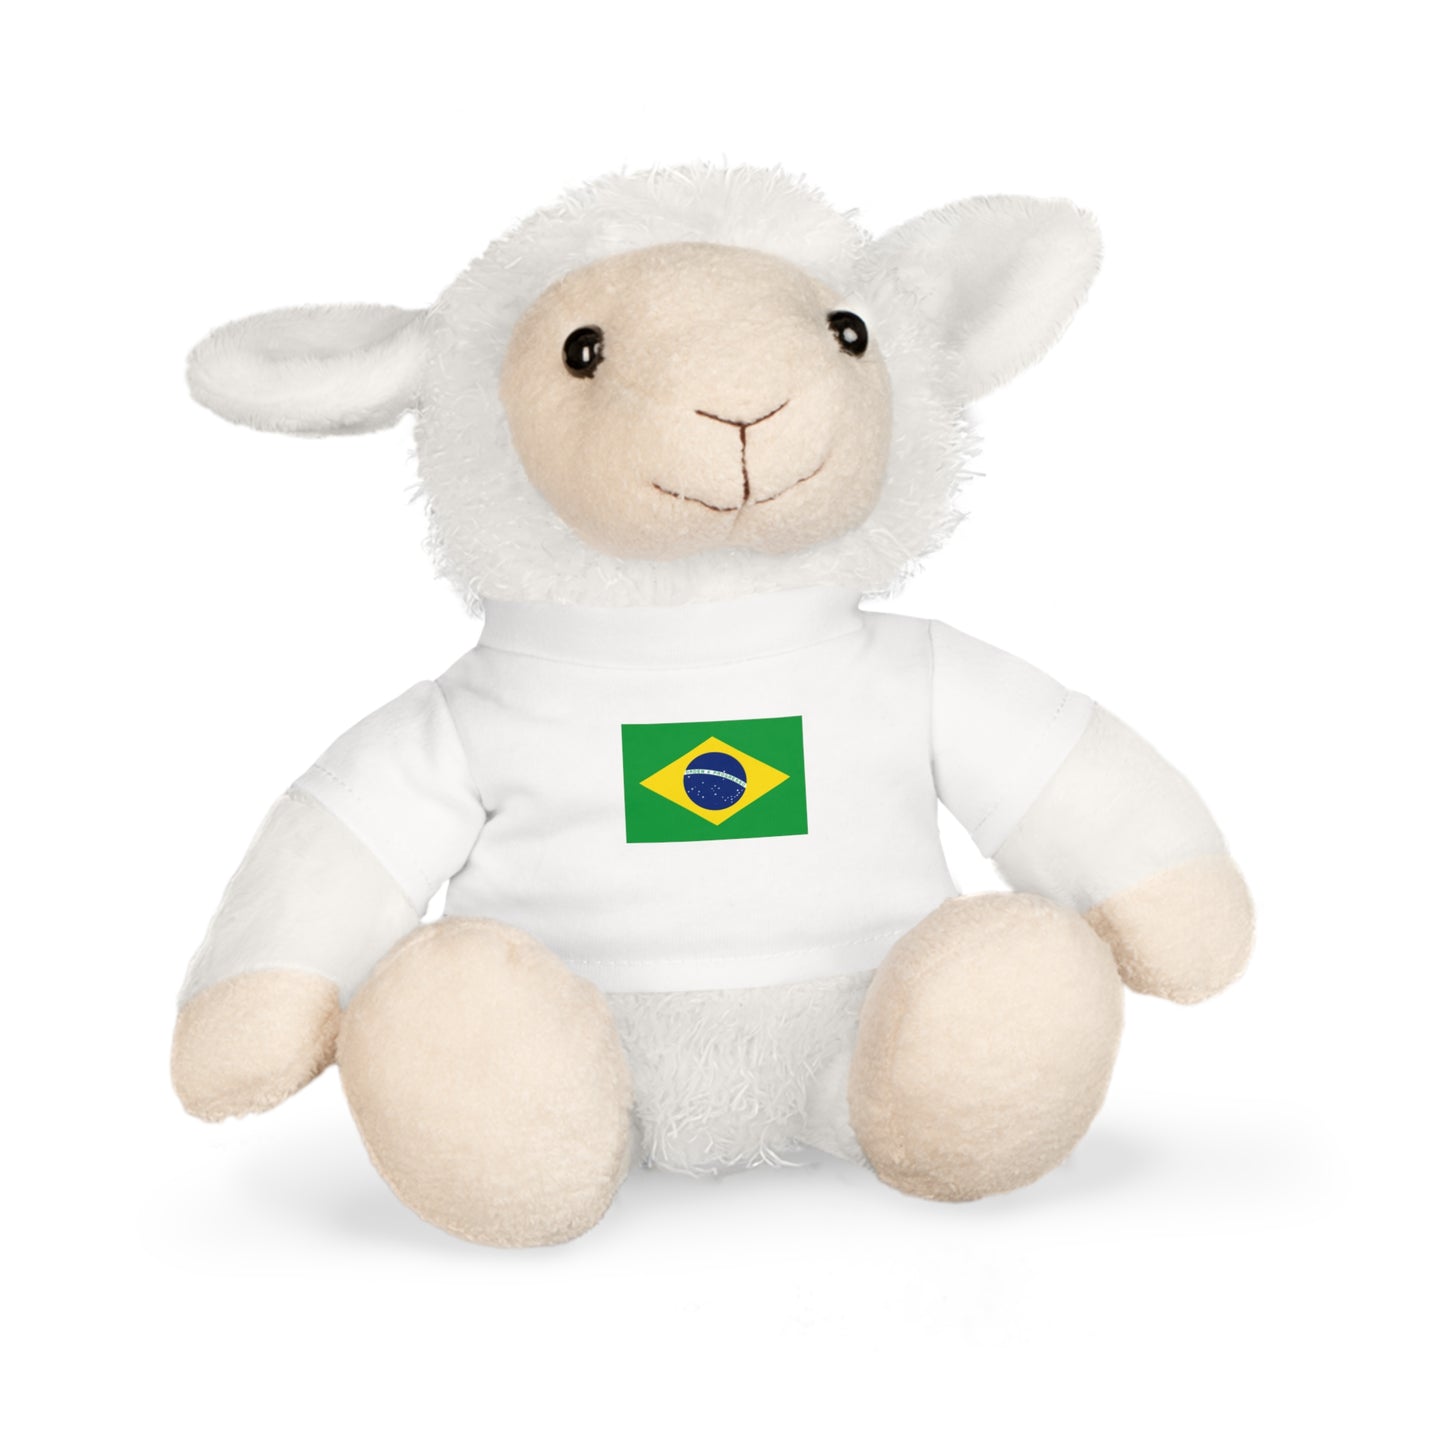 Plush Toy with a Brazil Shirt